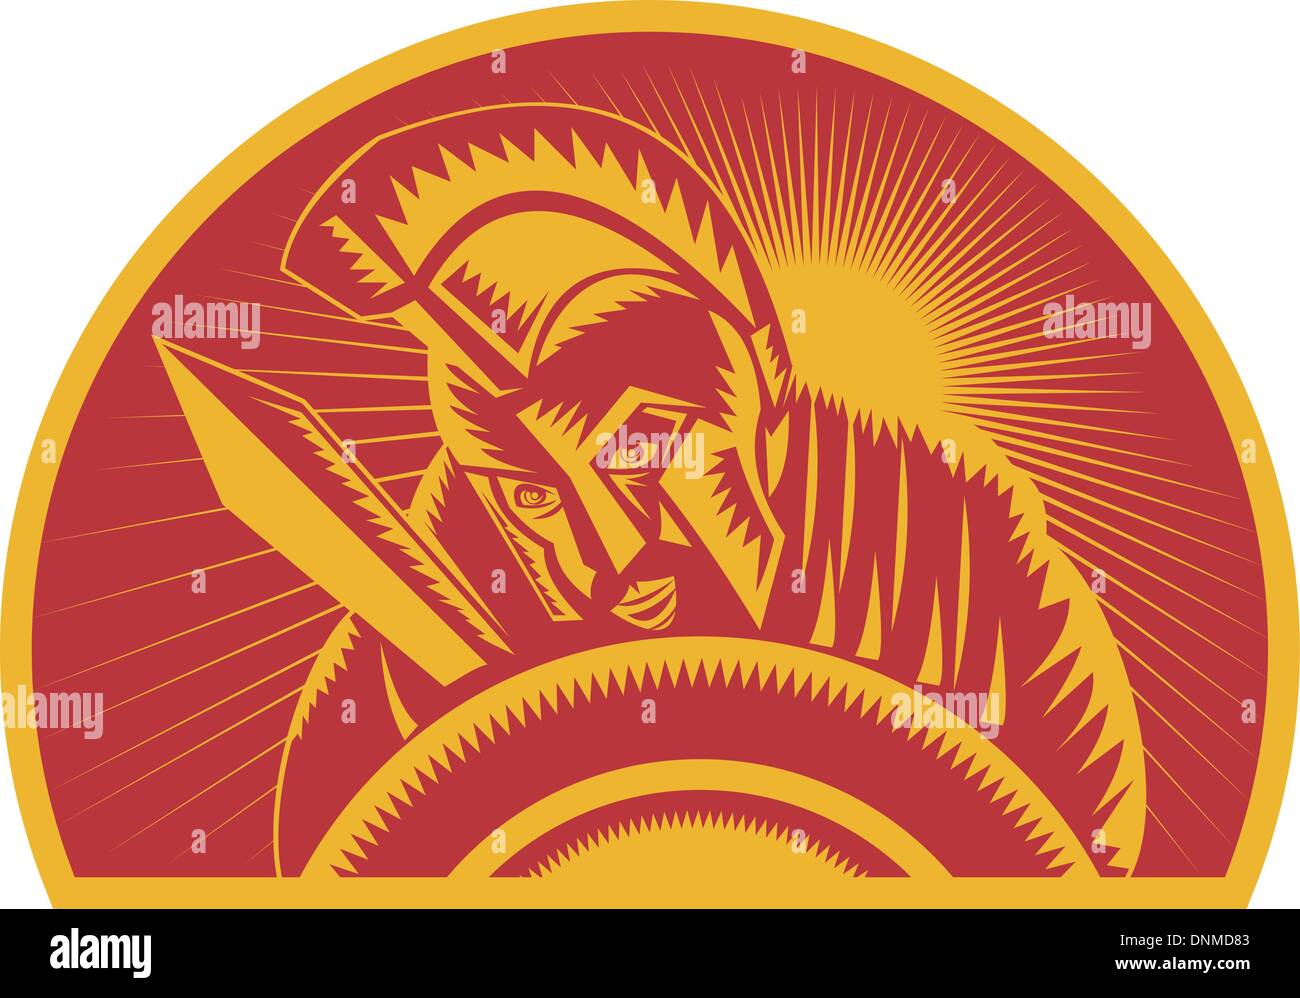 illustration of a Roman soldier or gladiator with sword and shield Stock Vector